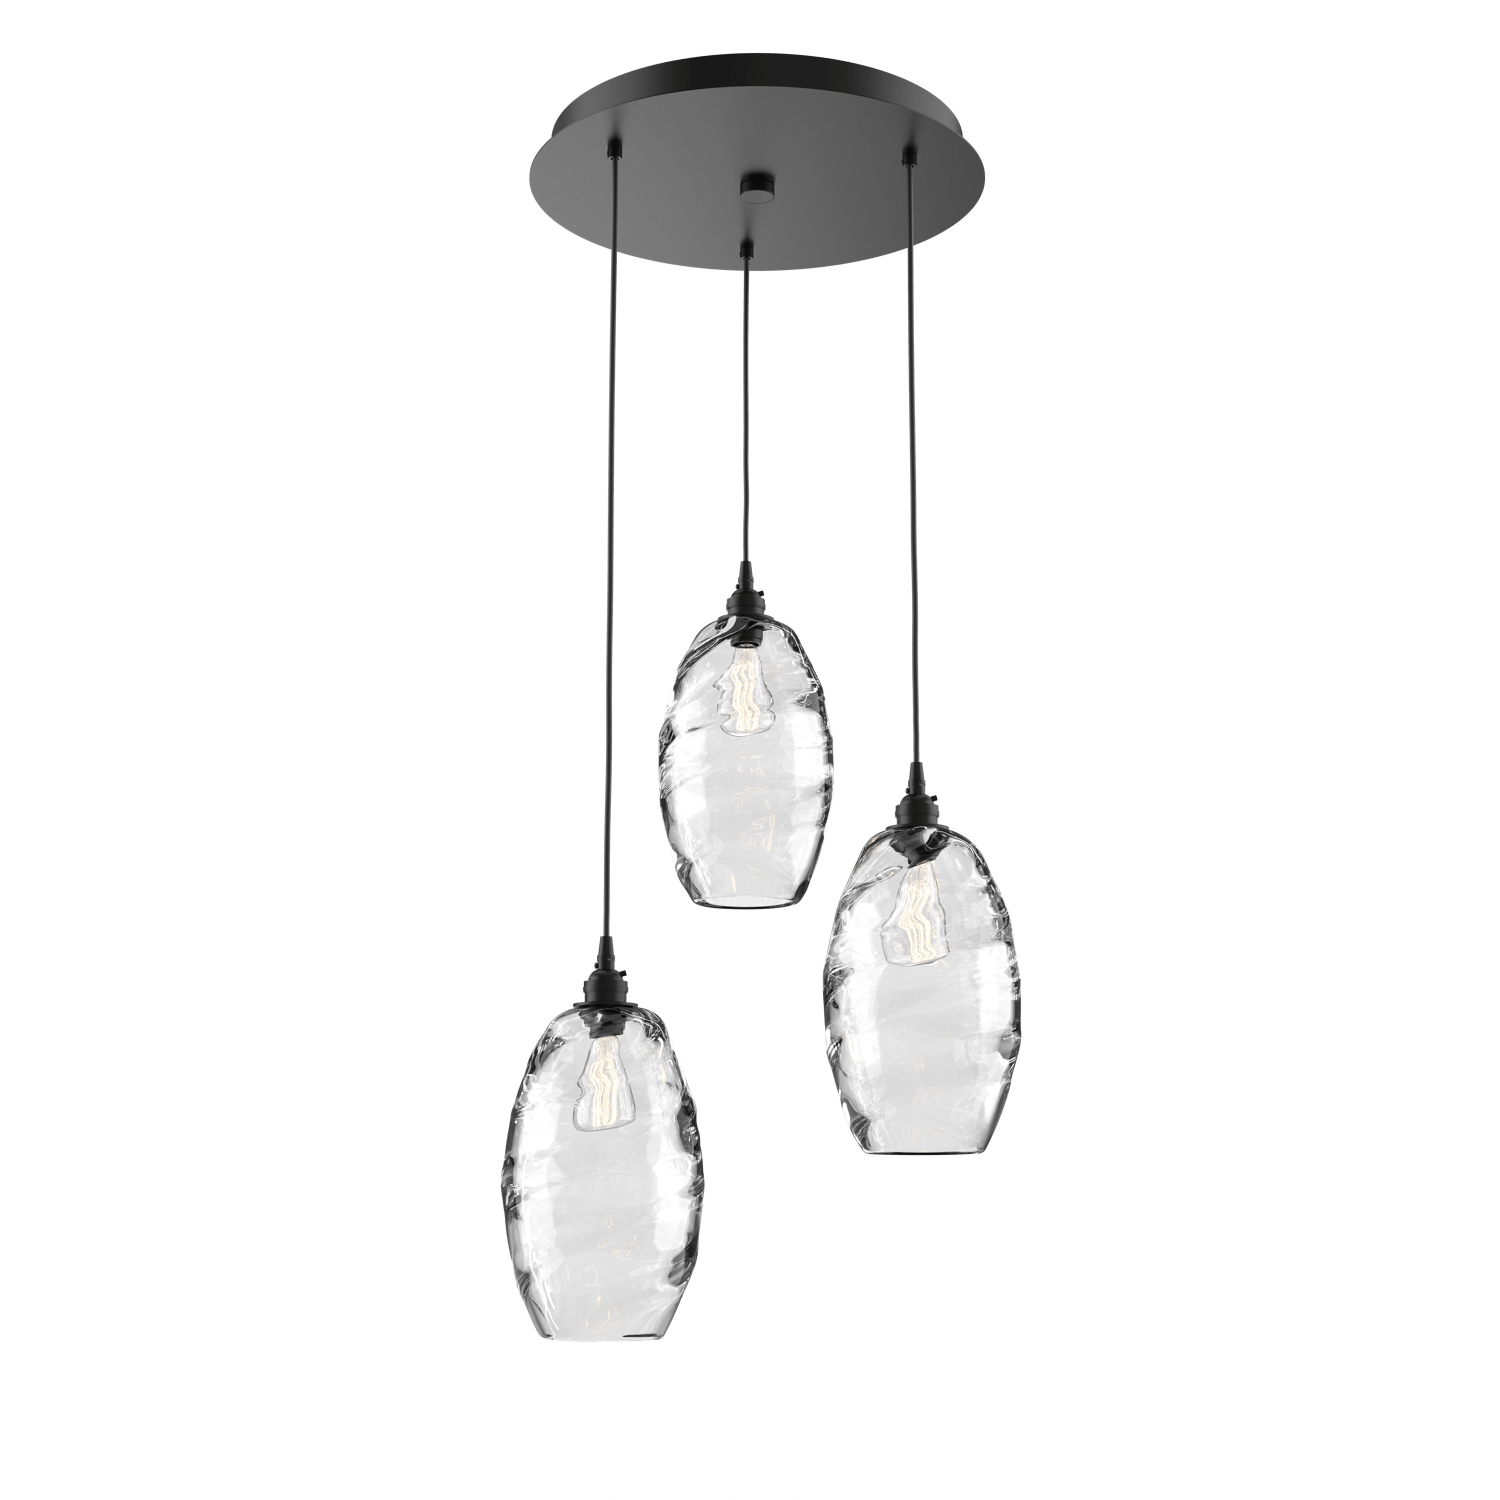 CHB0035-03-MB-OC-Hammerton-Studio-Optic-Blown-Glass-Elisse-3-light-round-pendant-chandelier-with-matte-black-finish-and-optic-clear-blown-glass-shades-and-incandescent-lamping